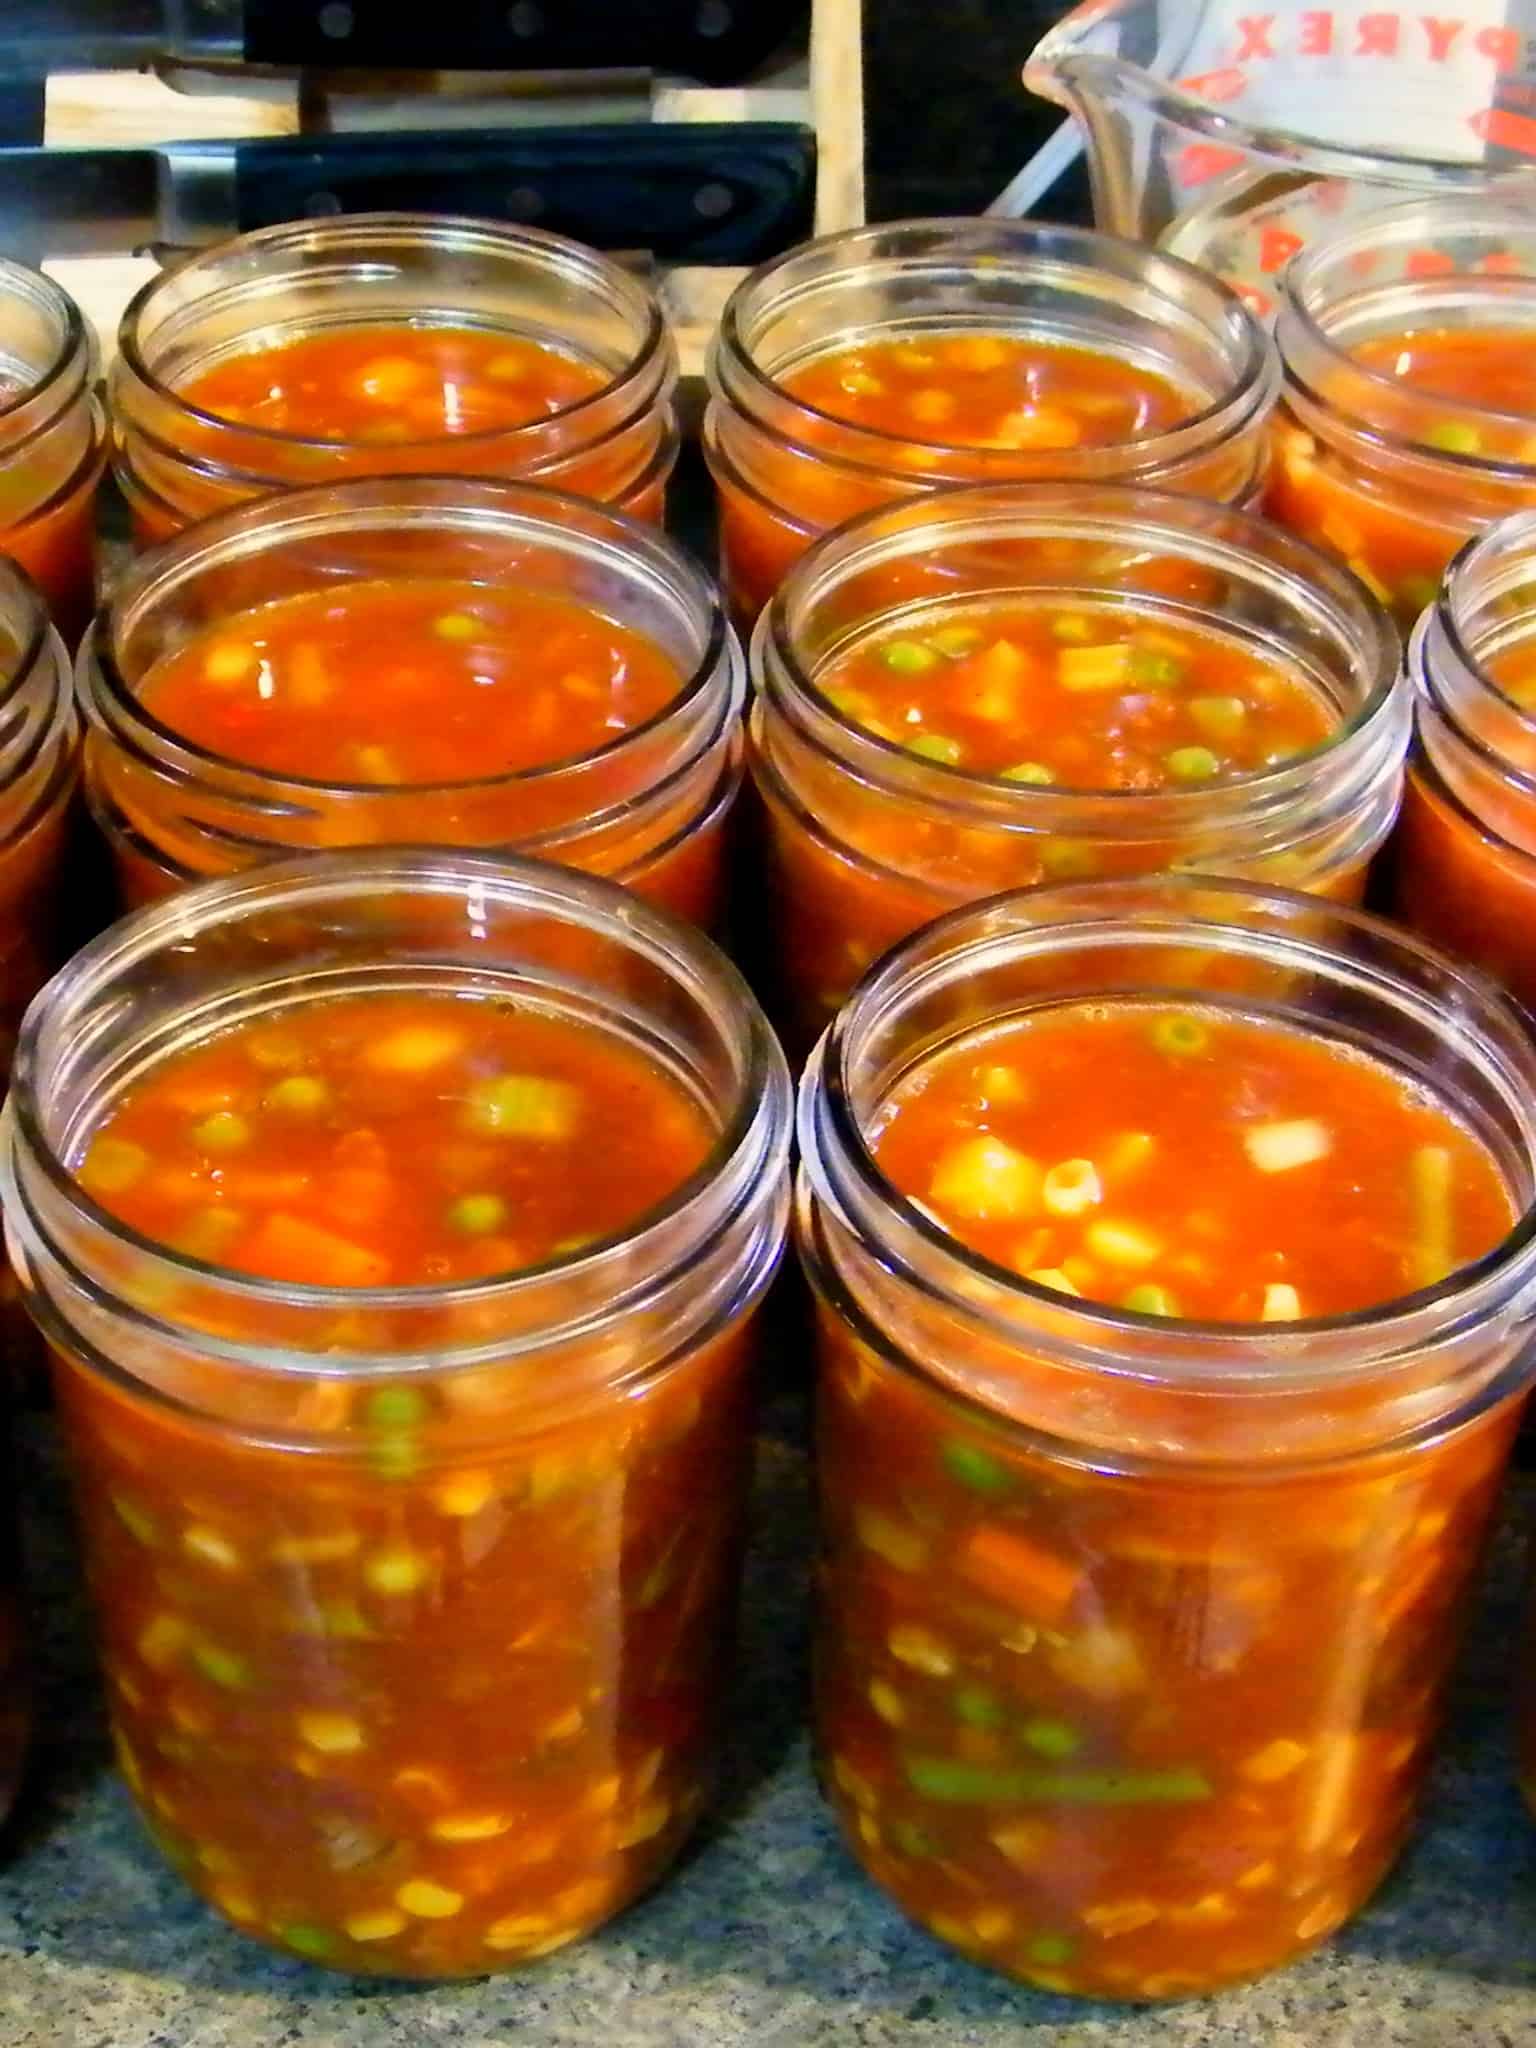 canning vegetable beef soup